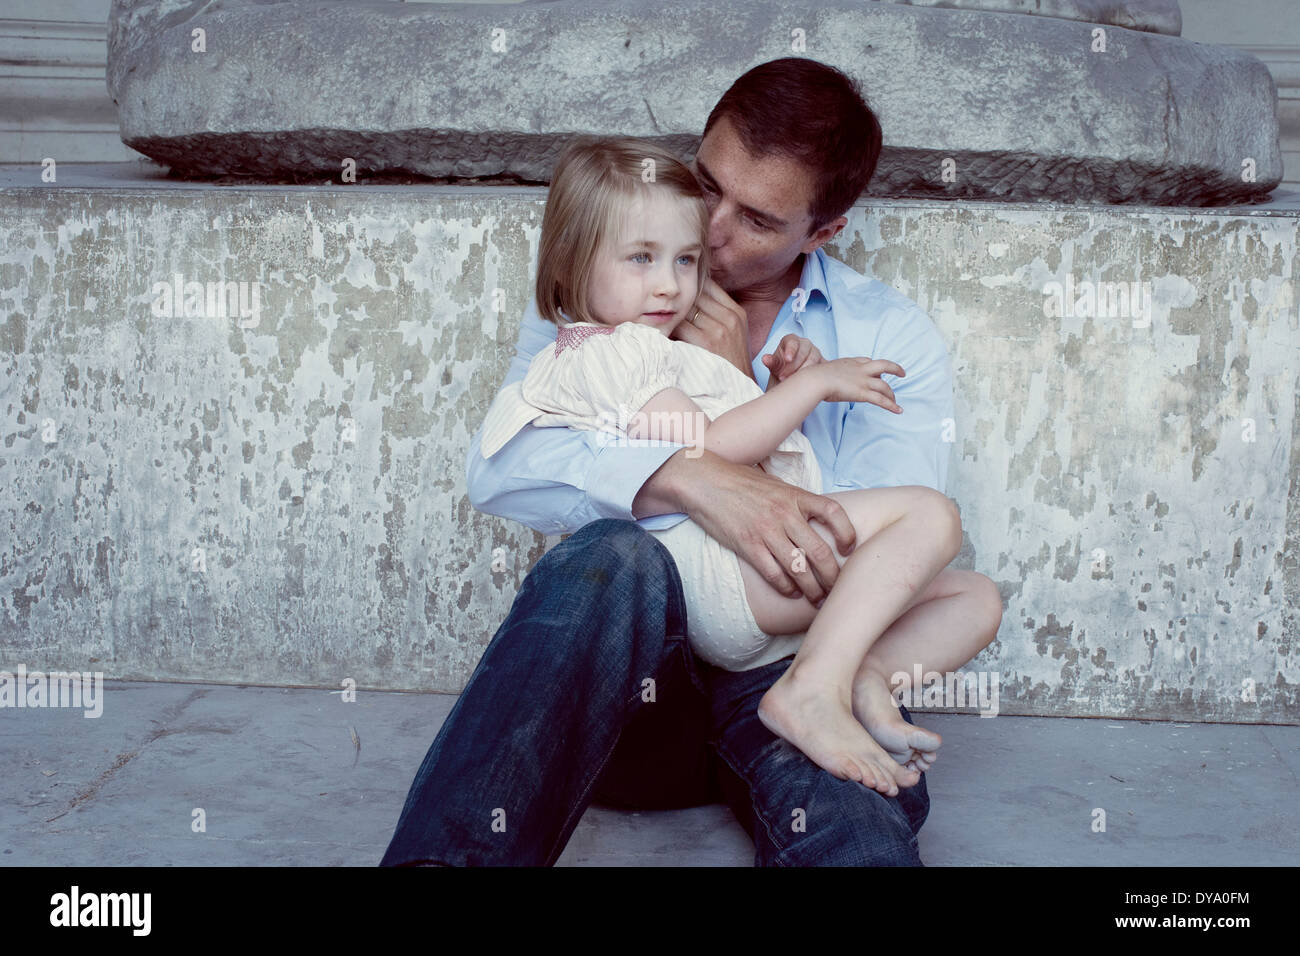 Father holding young daughter on his lap Stock Photo